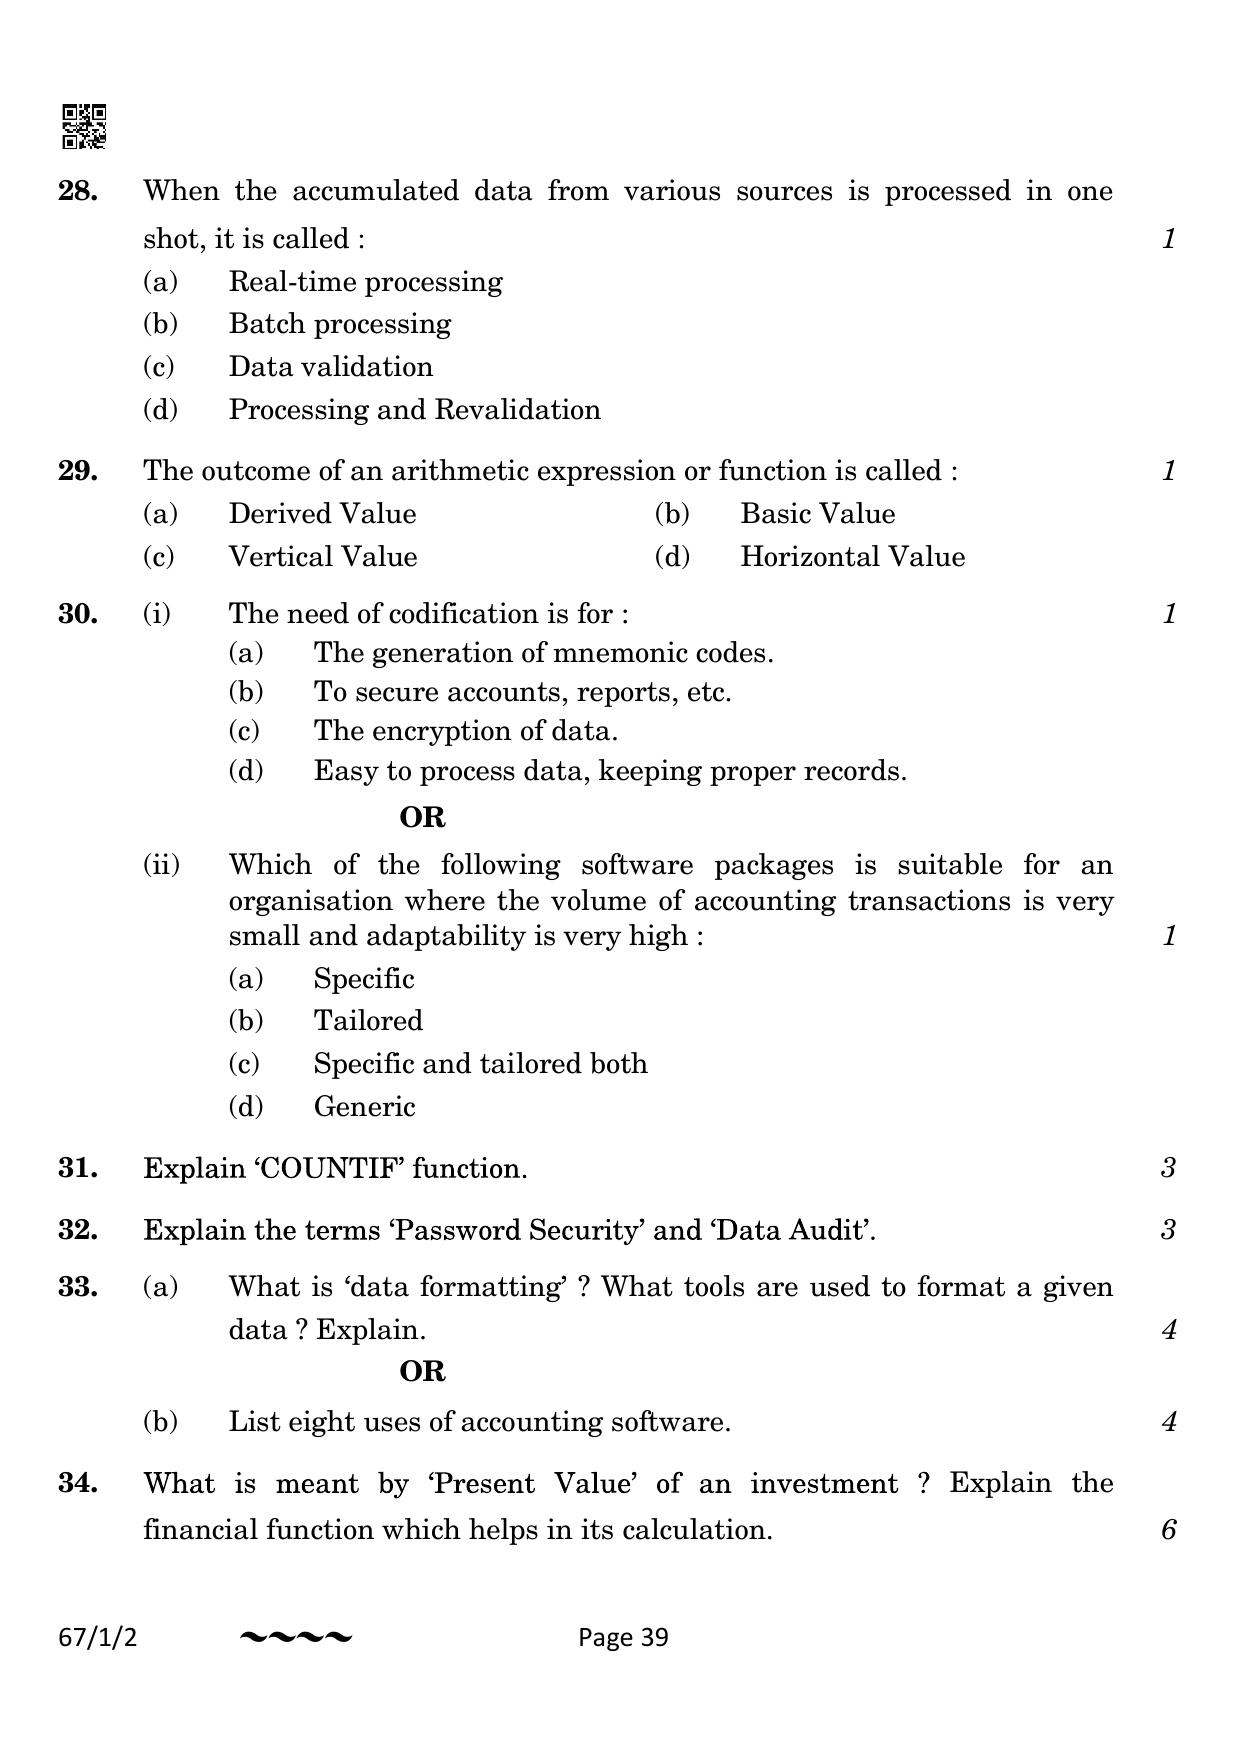 CBSE Class 12 67-1-2 Accountancy 2023 Question Paper - Page 39